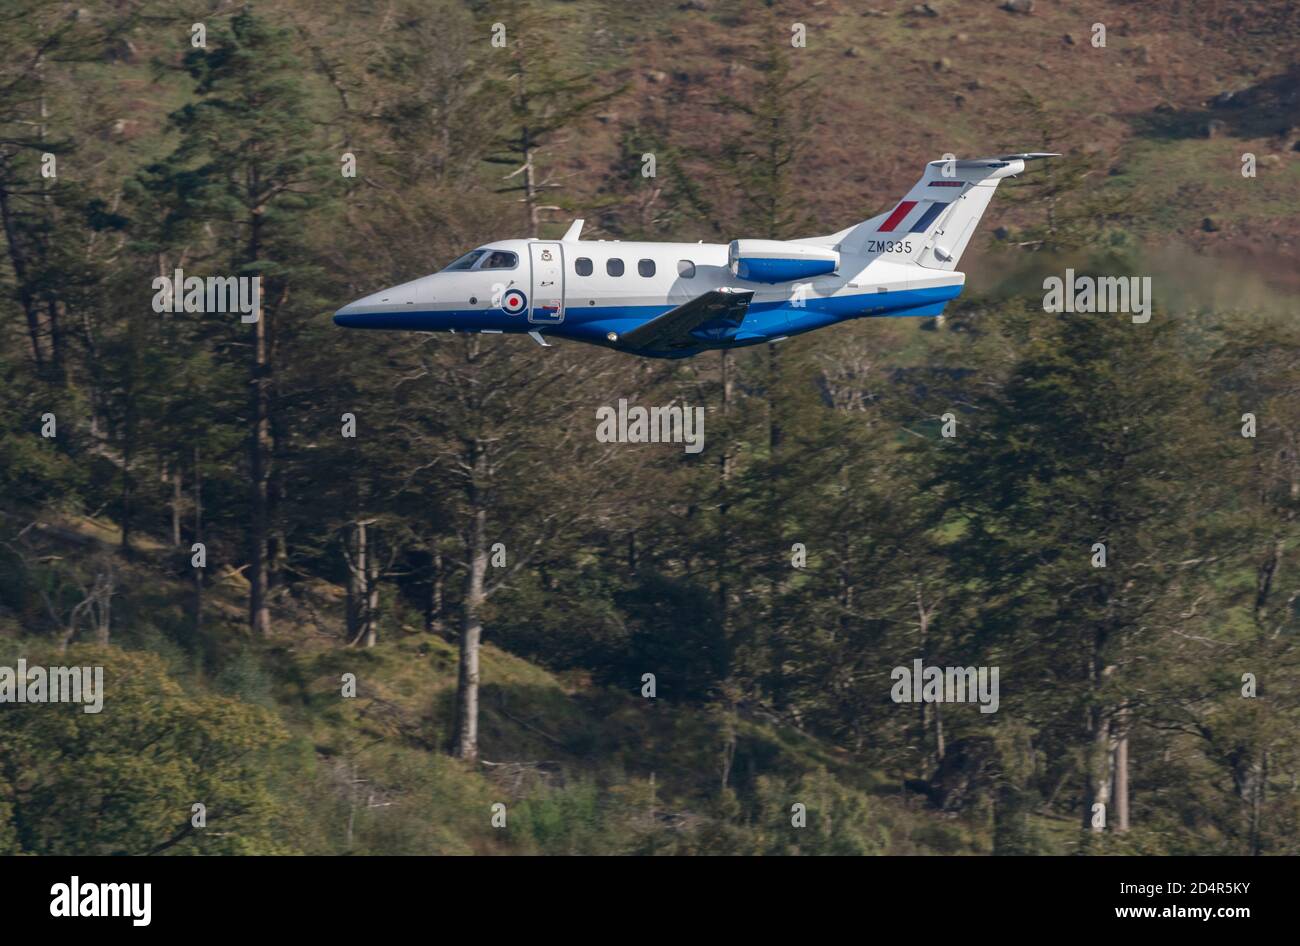 RAF Phenom ZM335, Low Level flying at Thirlmere in the lake District, LFA17 Stock Photo